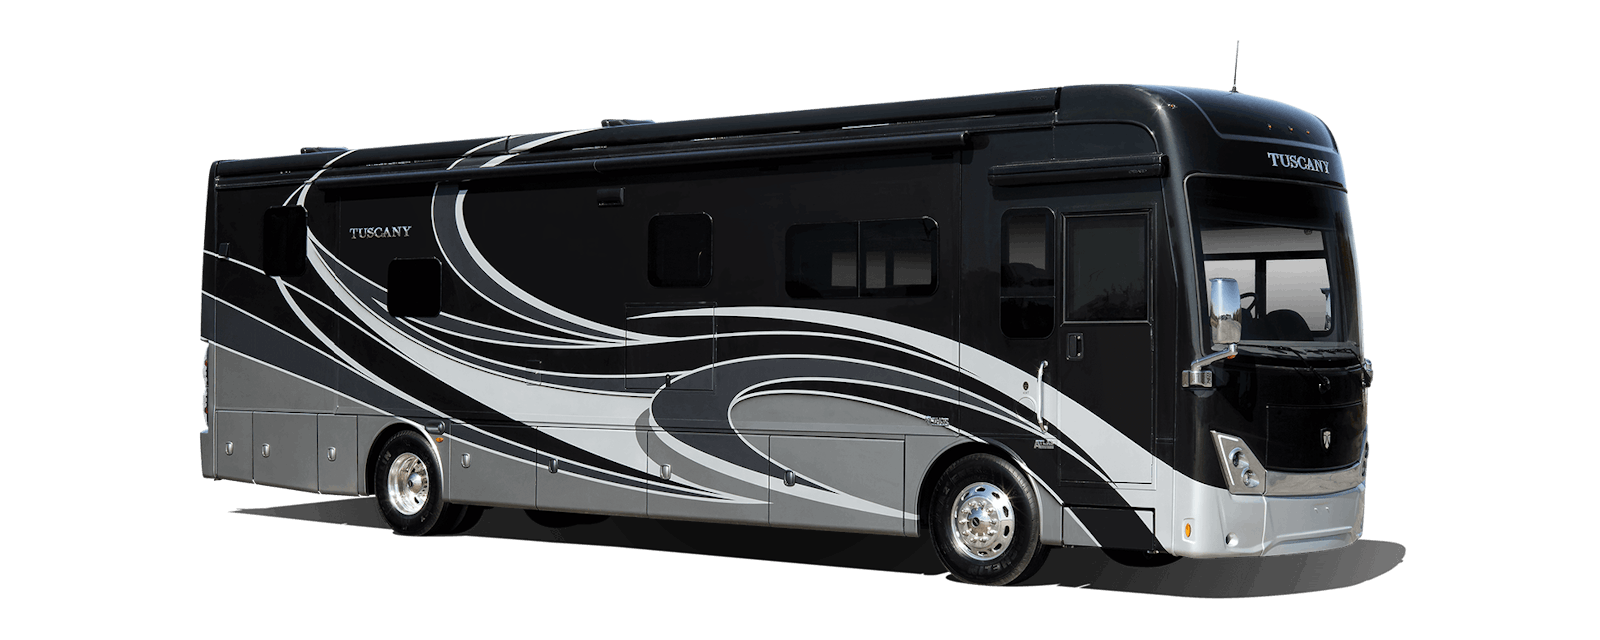 2023 Thor Tuscany Class A Diesel Pusher RV Stonegate Full Body Paint Exterior